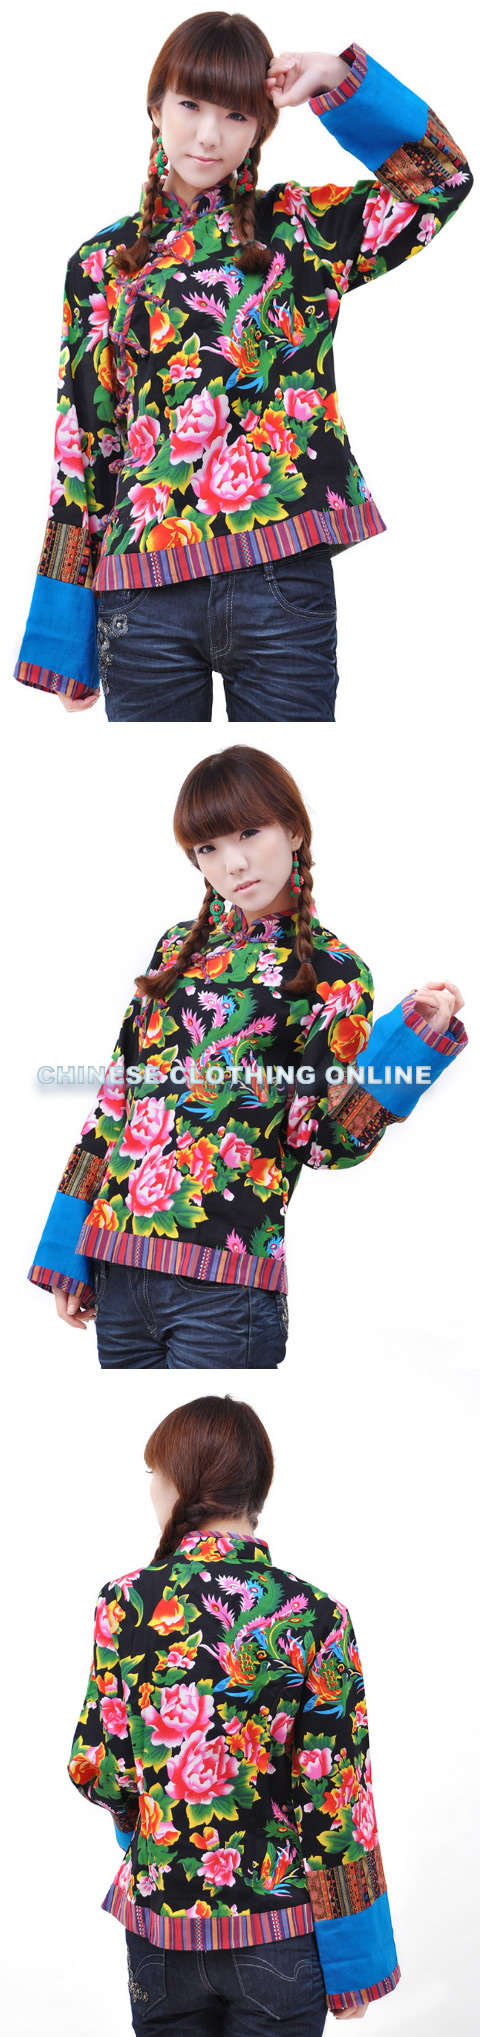 Ethnic Long-sleeve Floral Printing Blouse (CM)